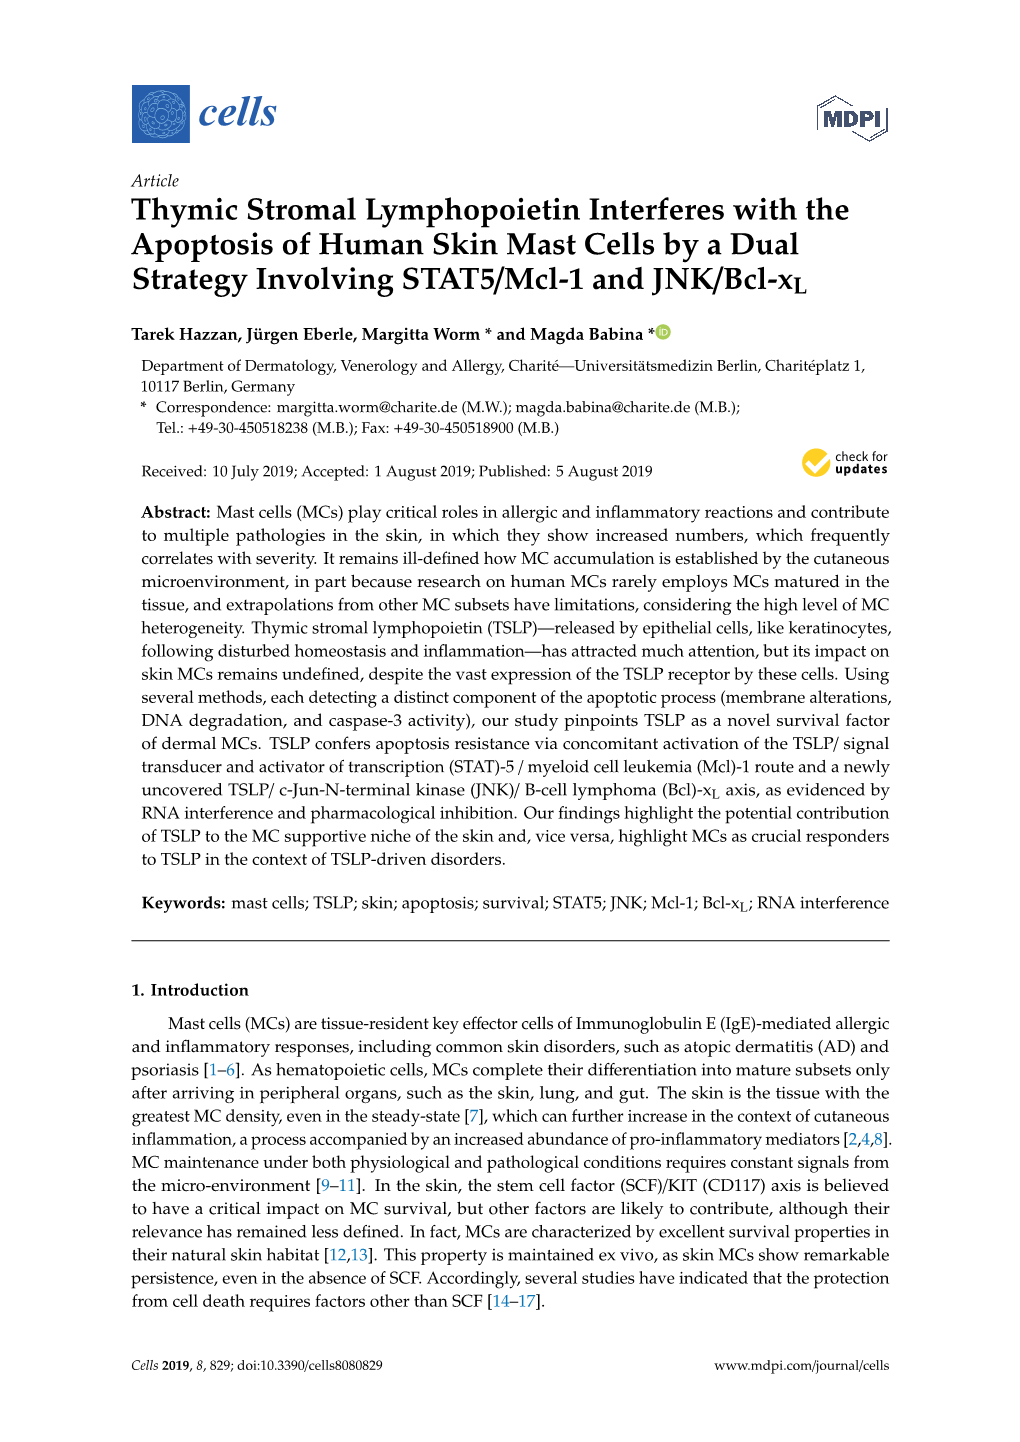 Thymic Stromal Lymphopoietin Interferes with the Apoptosis of Human Skin Mast Cells by a Dual Strategy Involving STAT5/Mcl-1 and JNK/Bcl-Xl